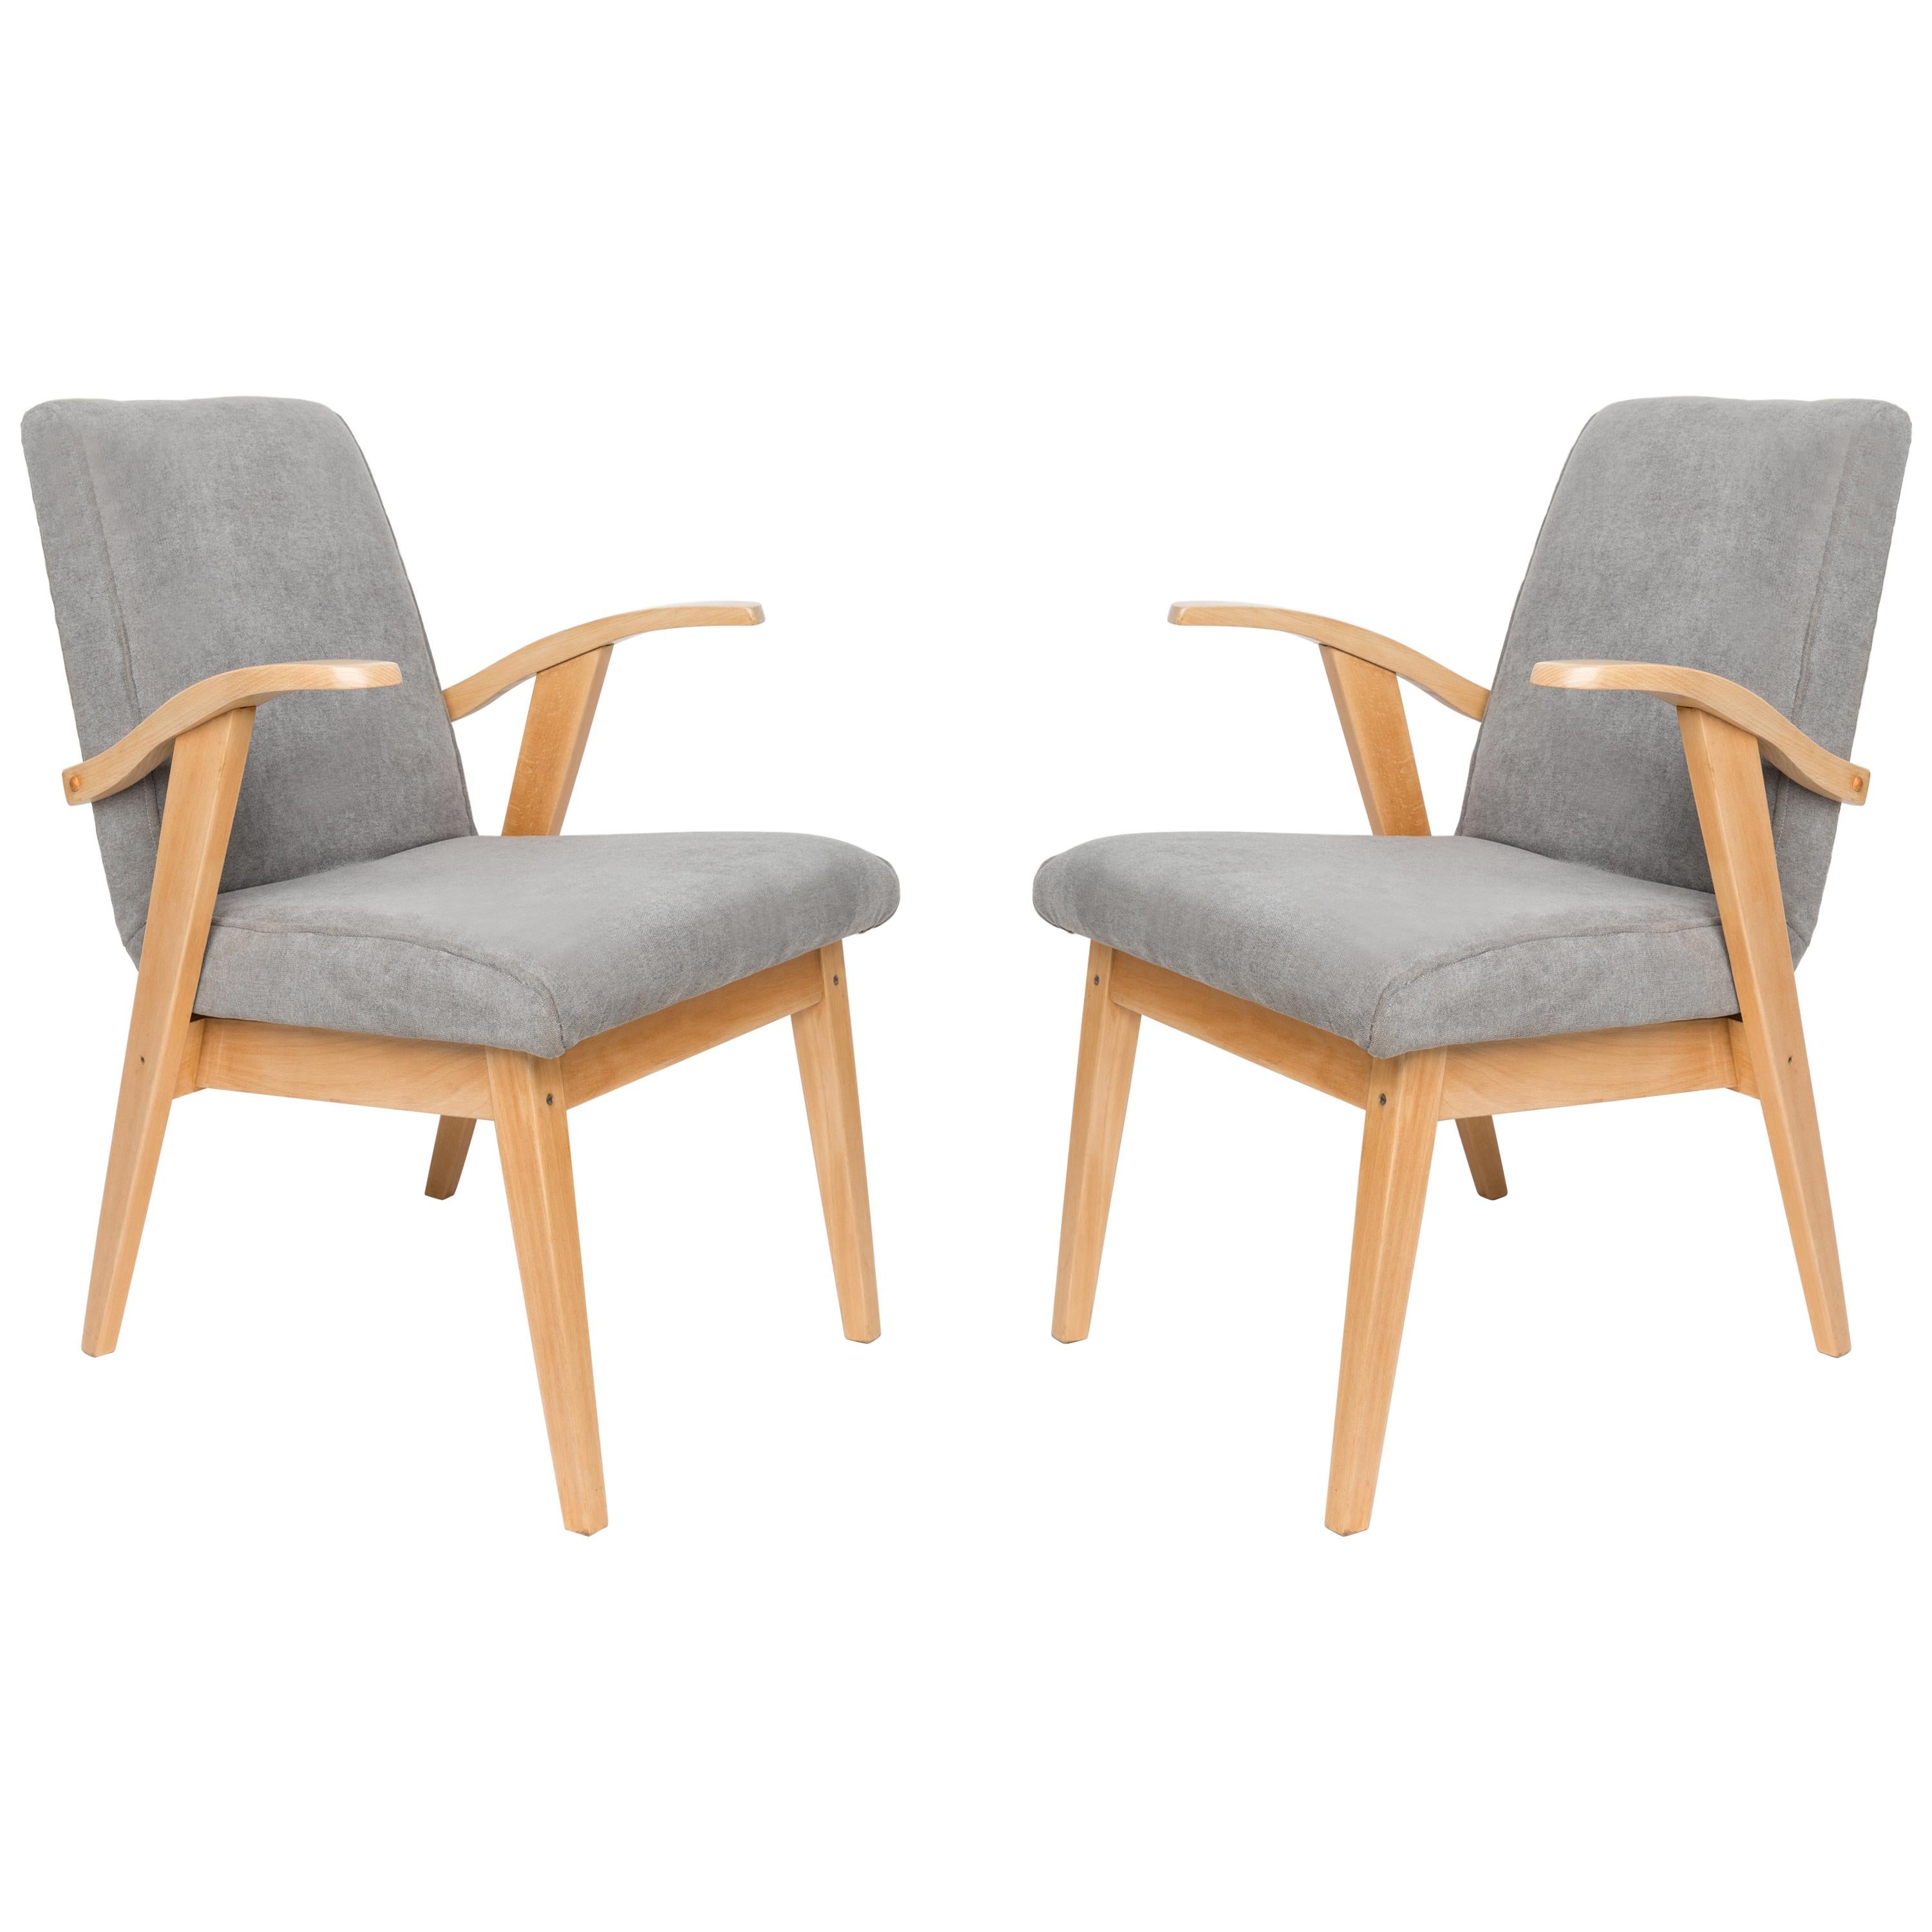 Set of Two Vintage Gray Chairs, 1960s